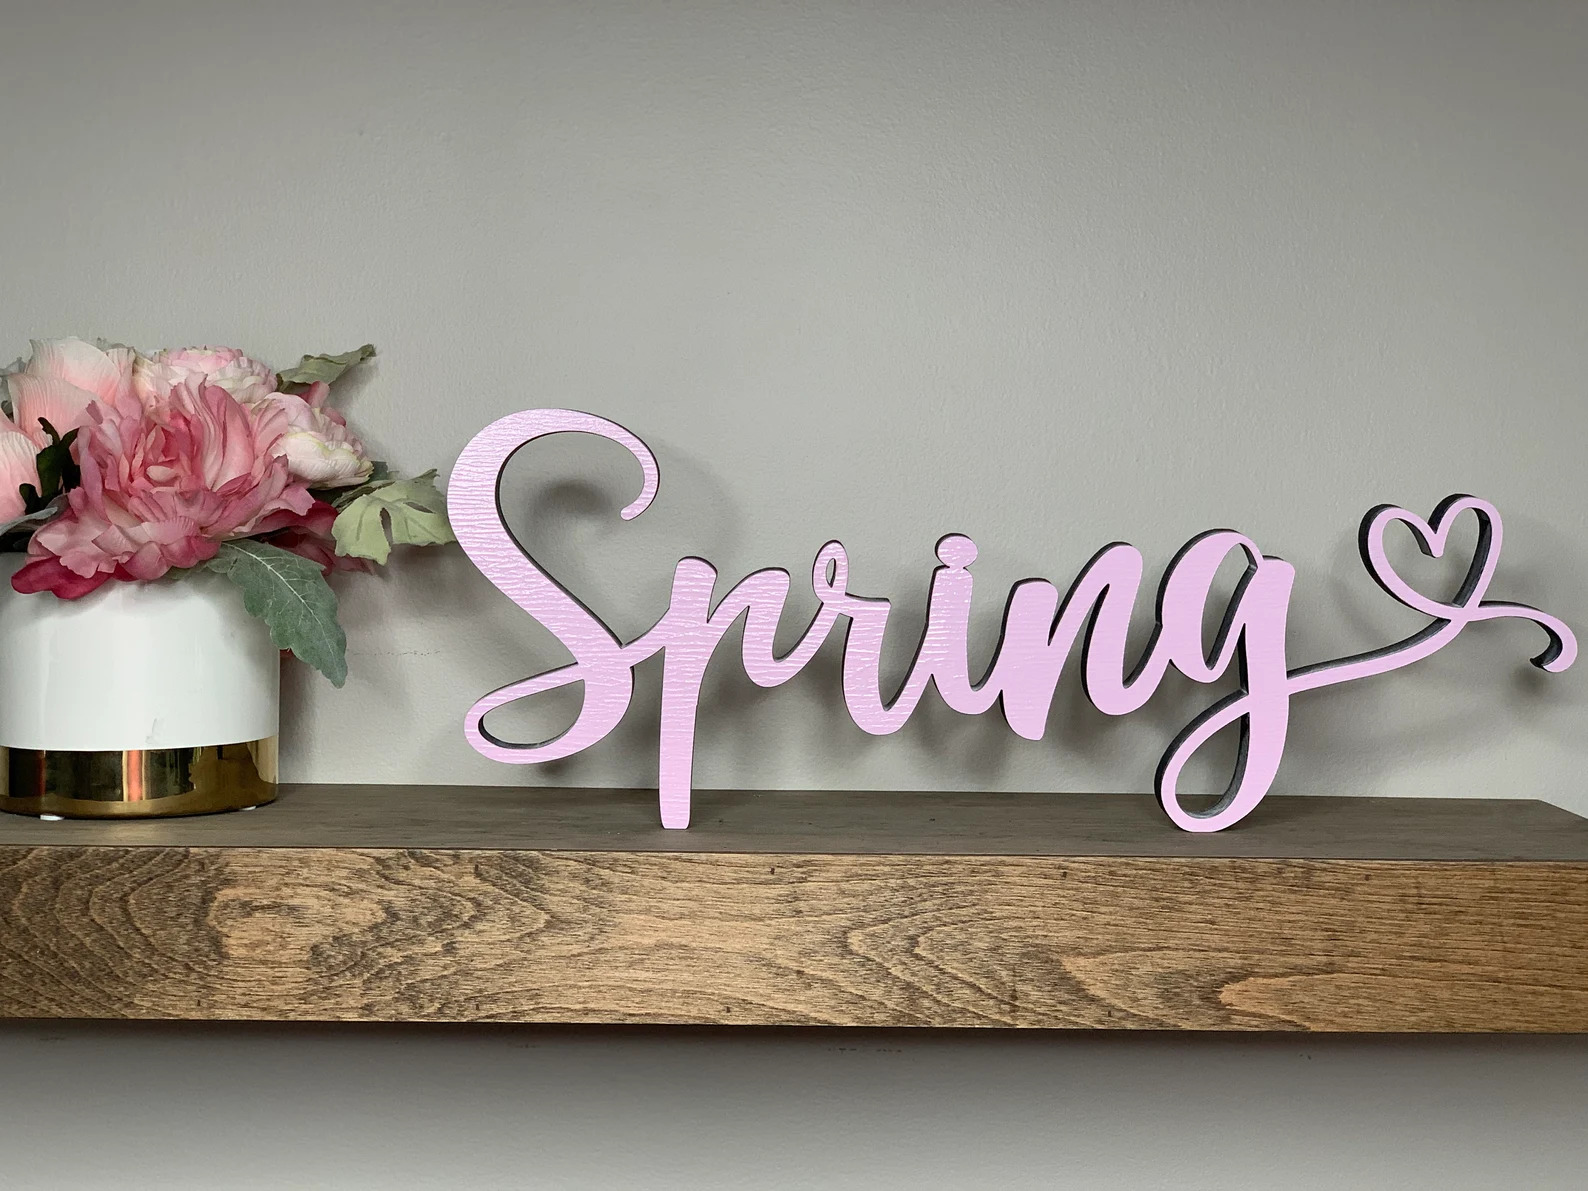 16 Vibrant Spring Sign Designs to Welcome the New Season